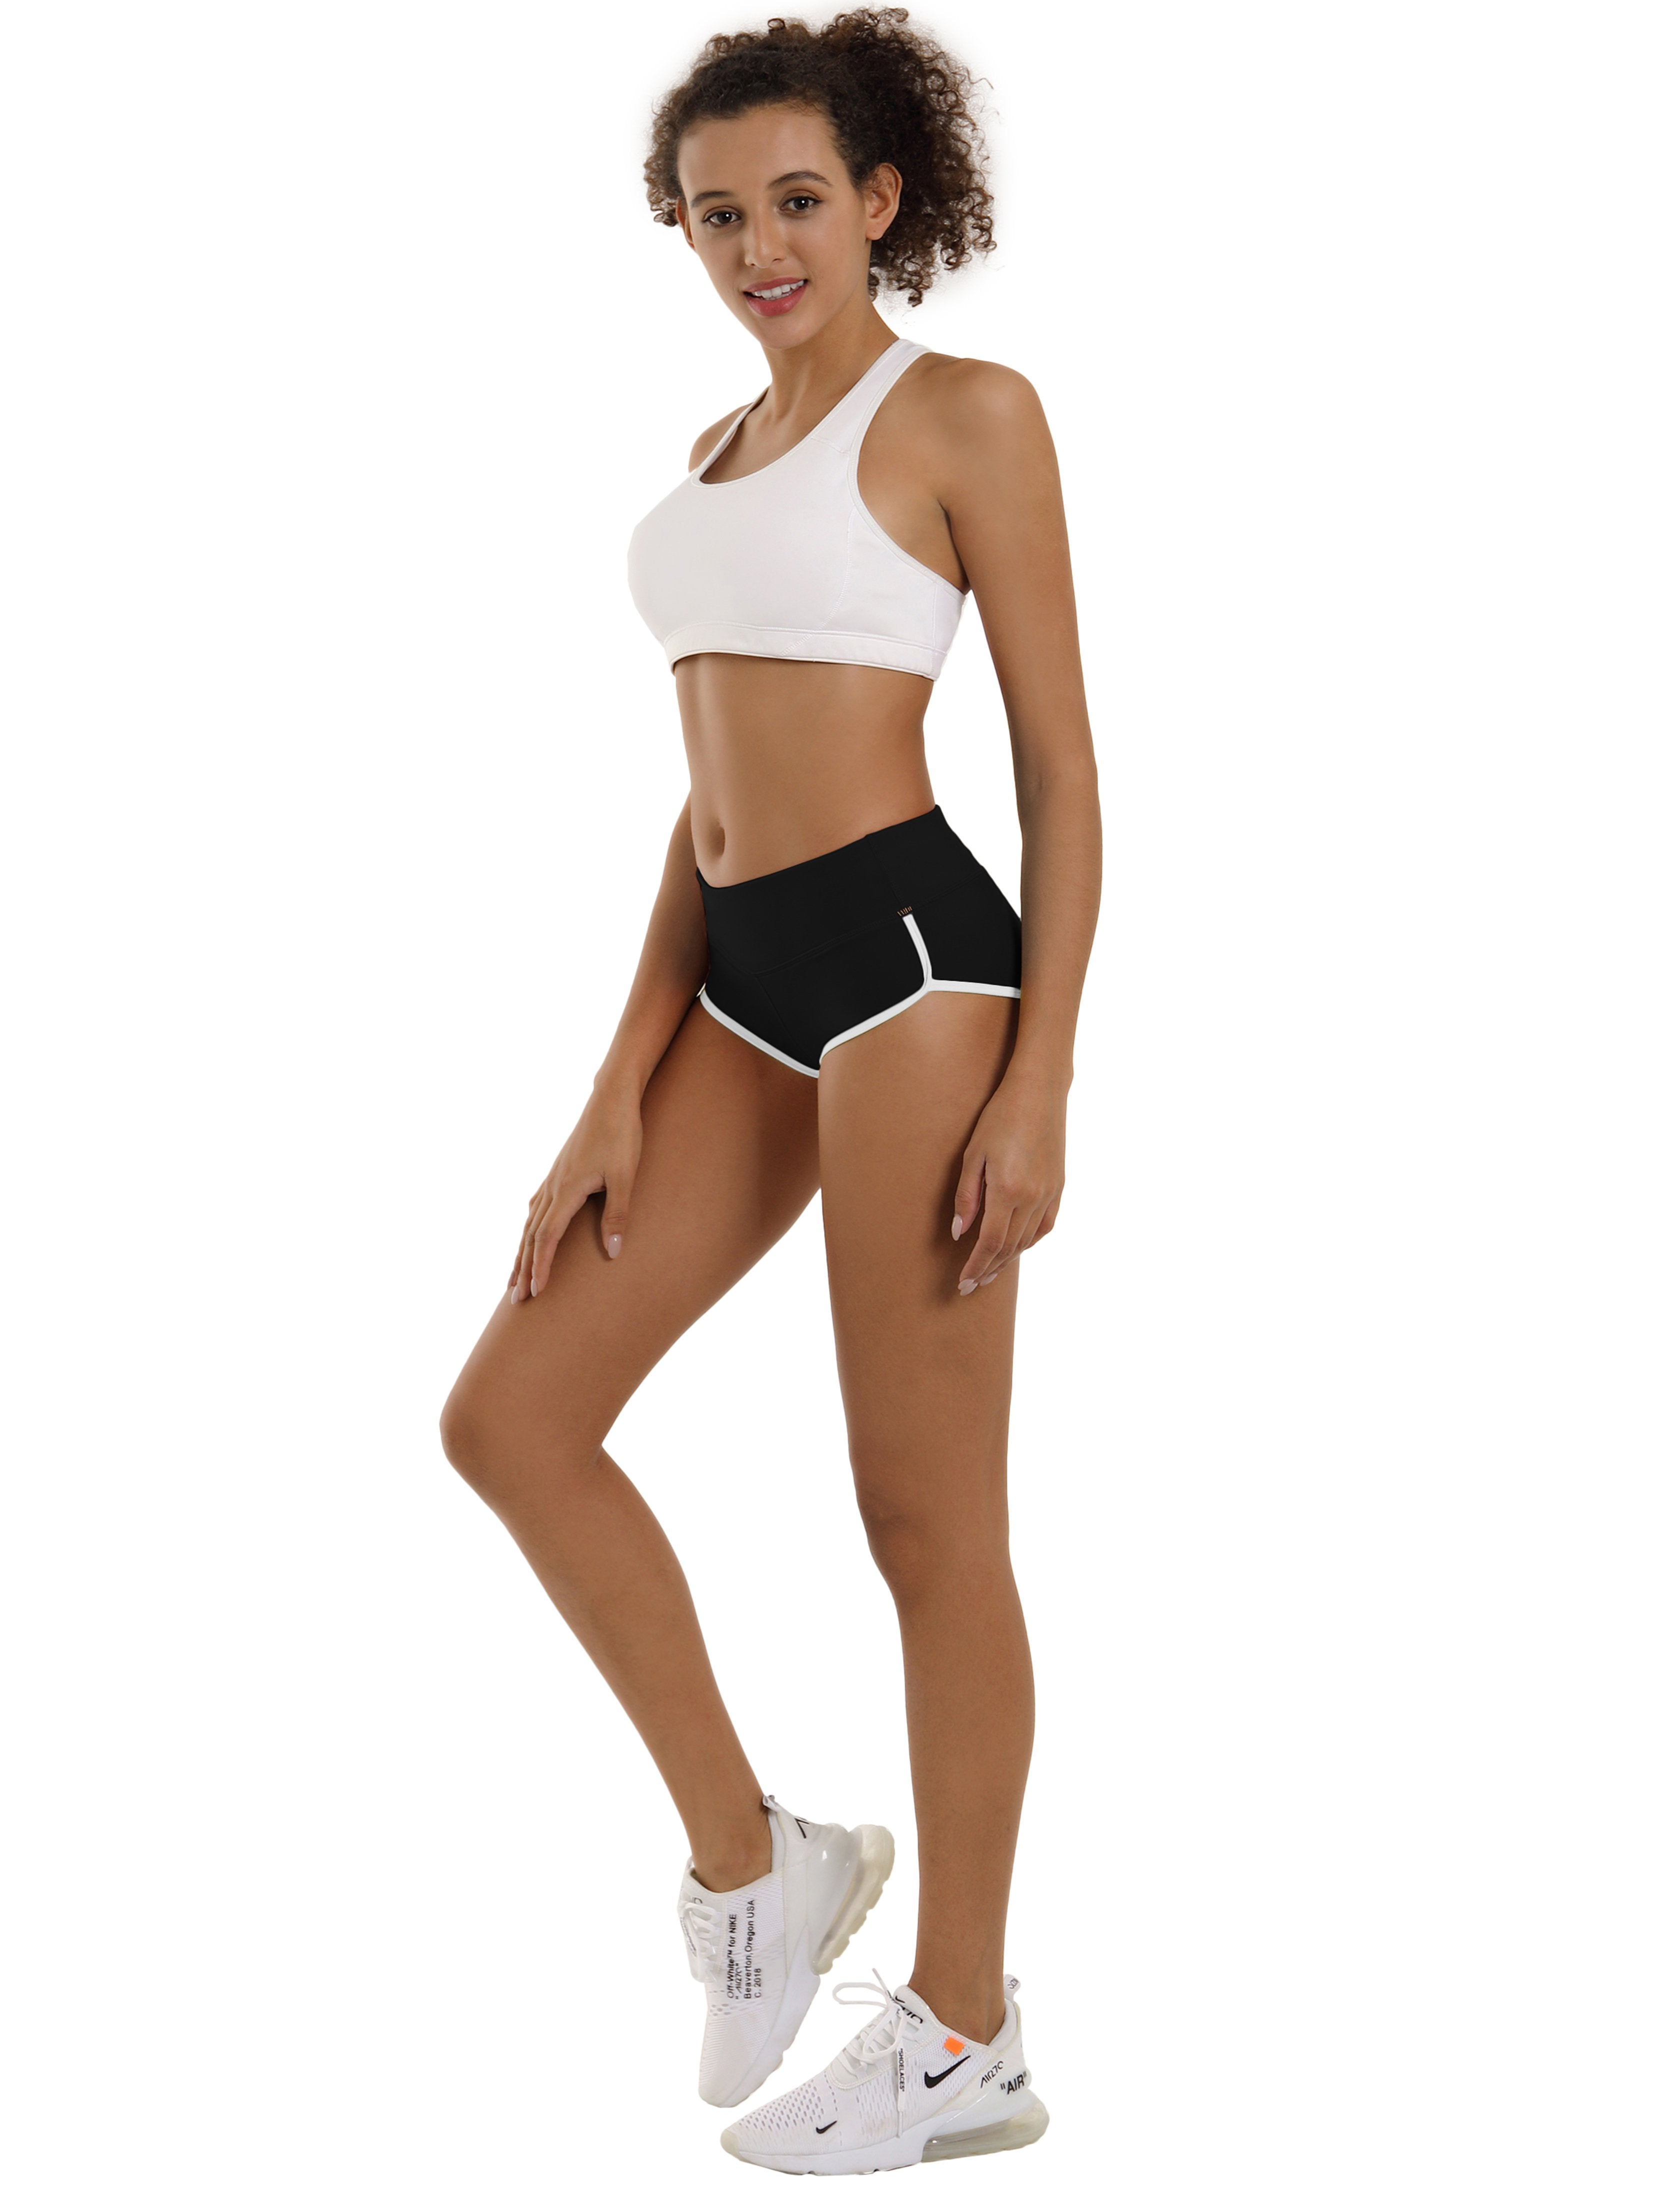 Sexy Booty Golf Shorts black Sleek, soft, smooth and totally comfortable: our newest sexy style is here. Softest-ever fabric High elasticity High density 4-way stretch Fabric doesn't attract lint easily No see-through Moisture-wicking Machine wash 75%Nylon/25%Spandex